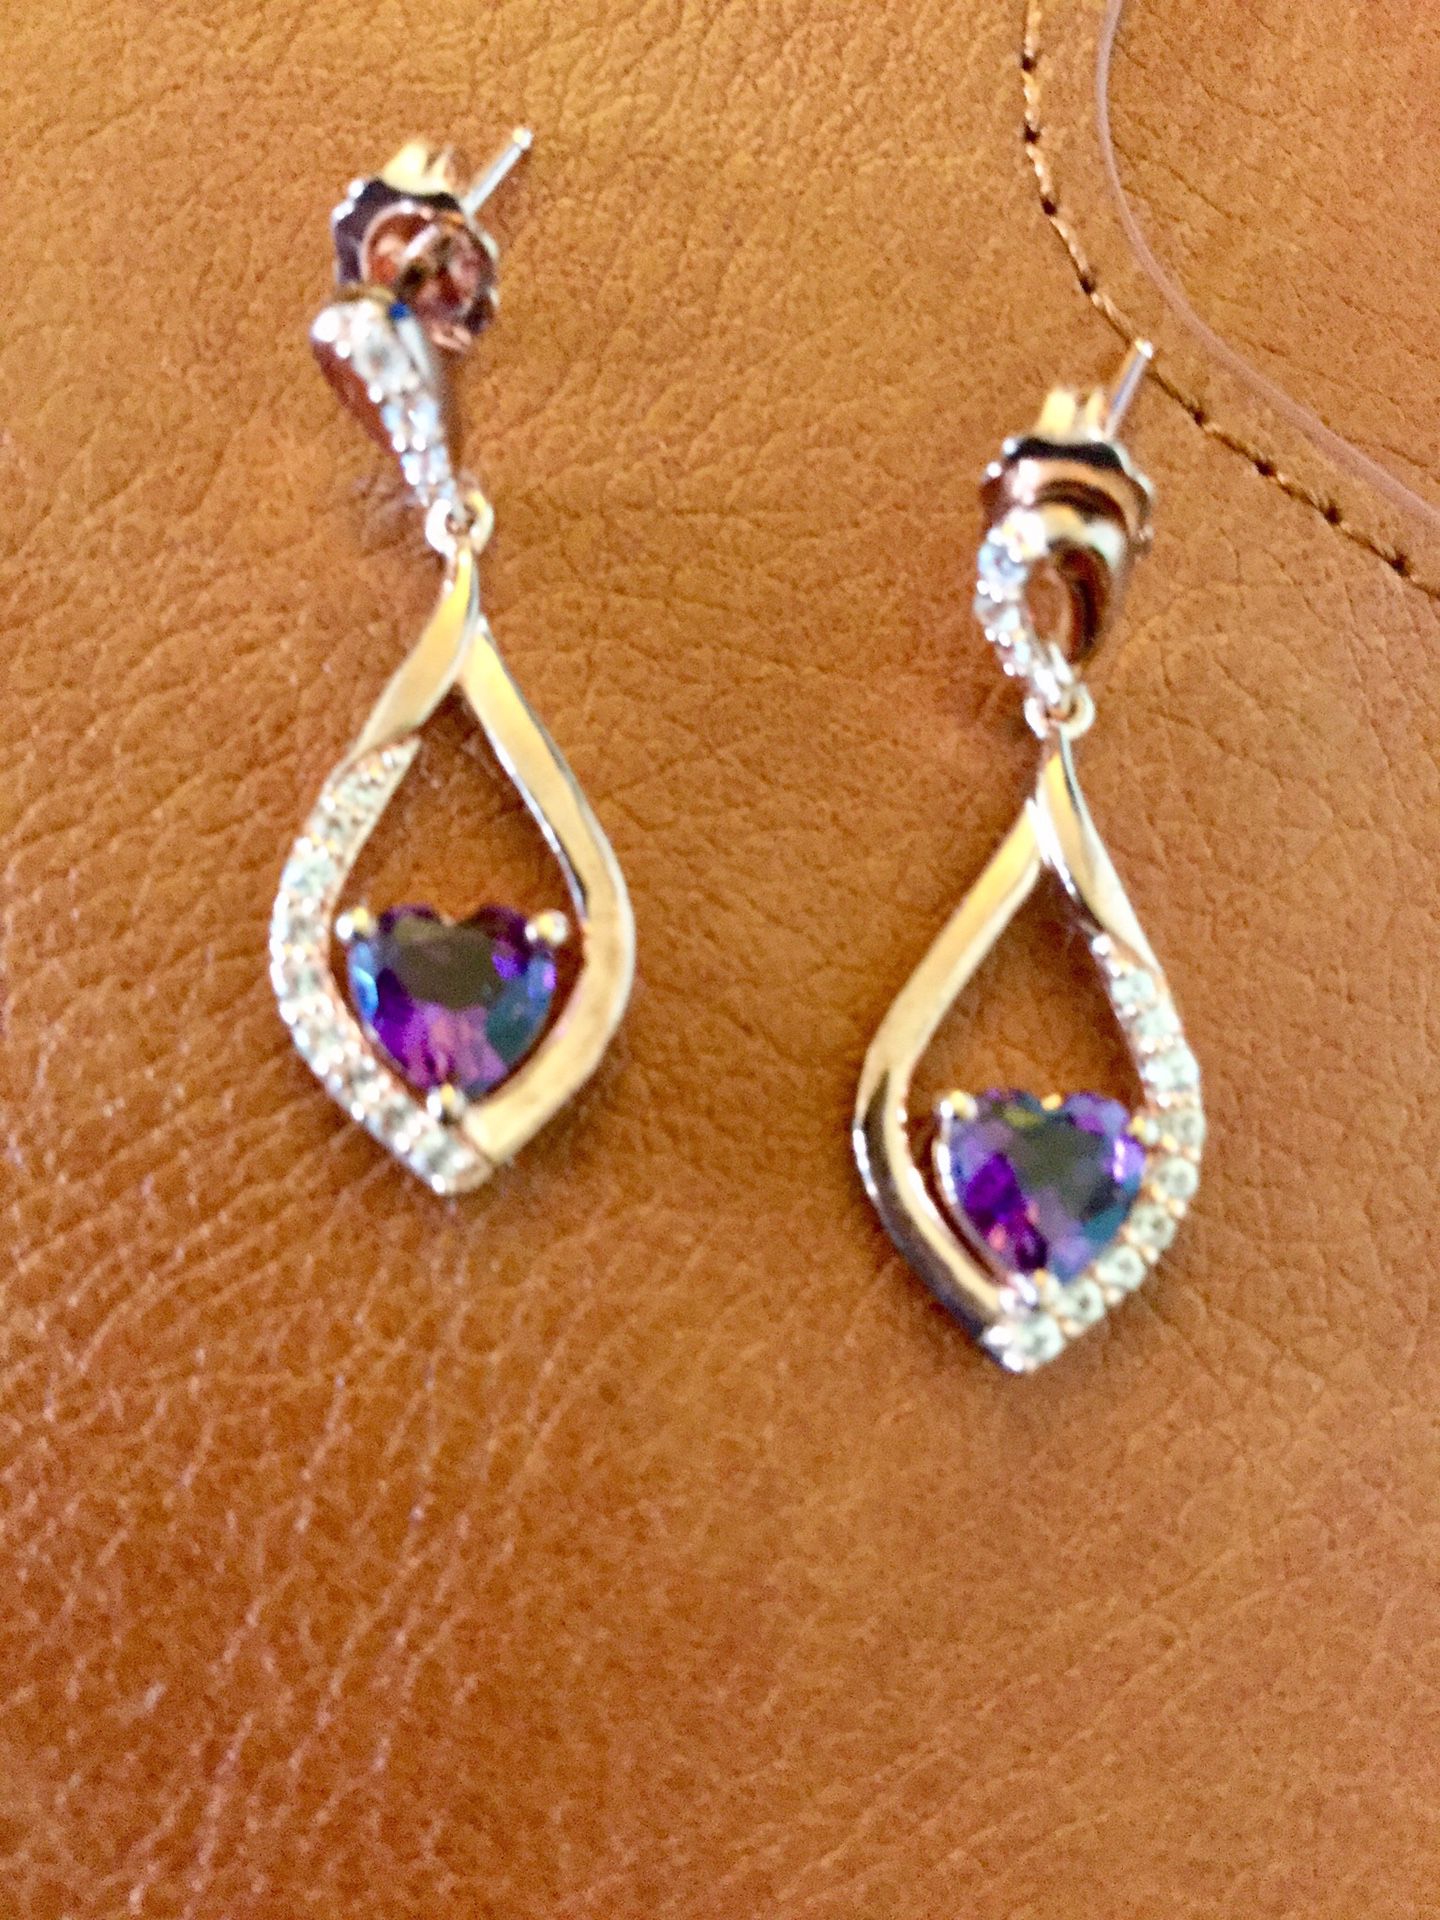 Amethyst gemstone Rose Gold earrings with delicate crystals / New jewelry beautiful 💜 🎉